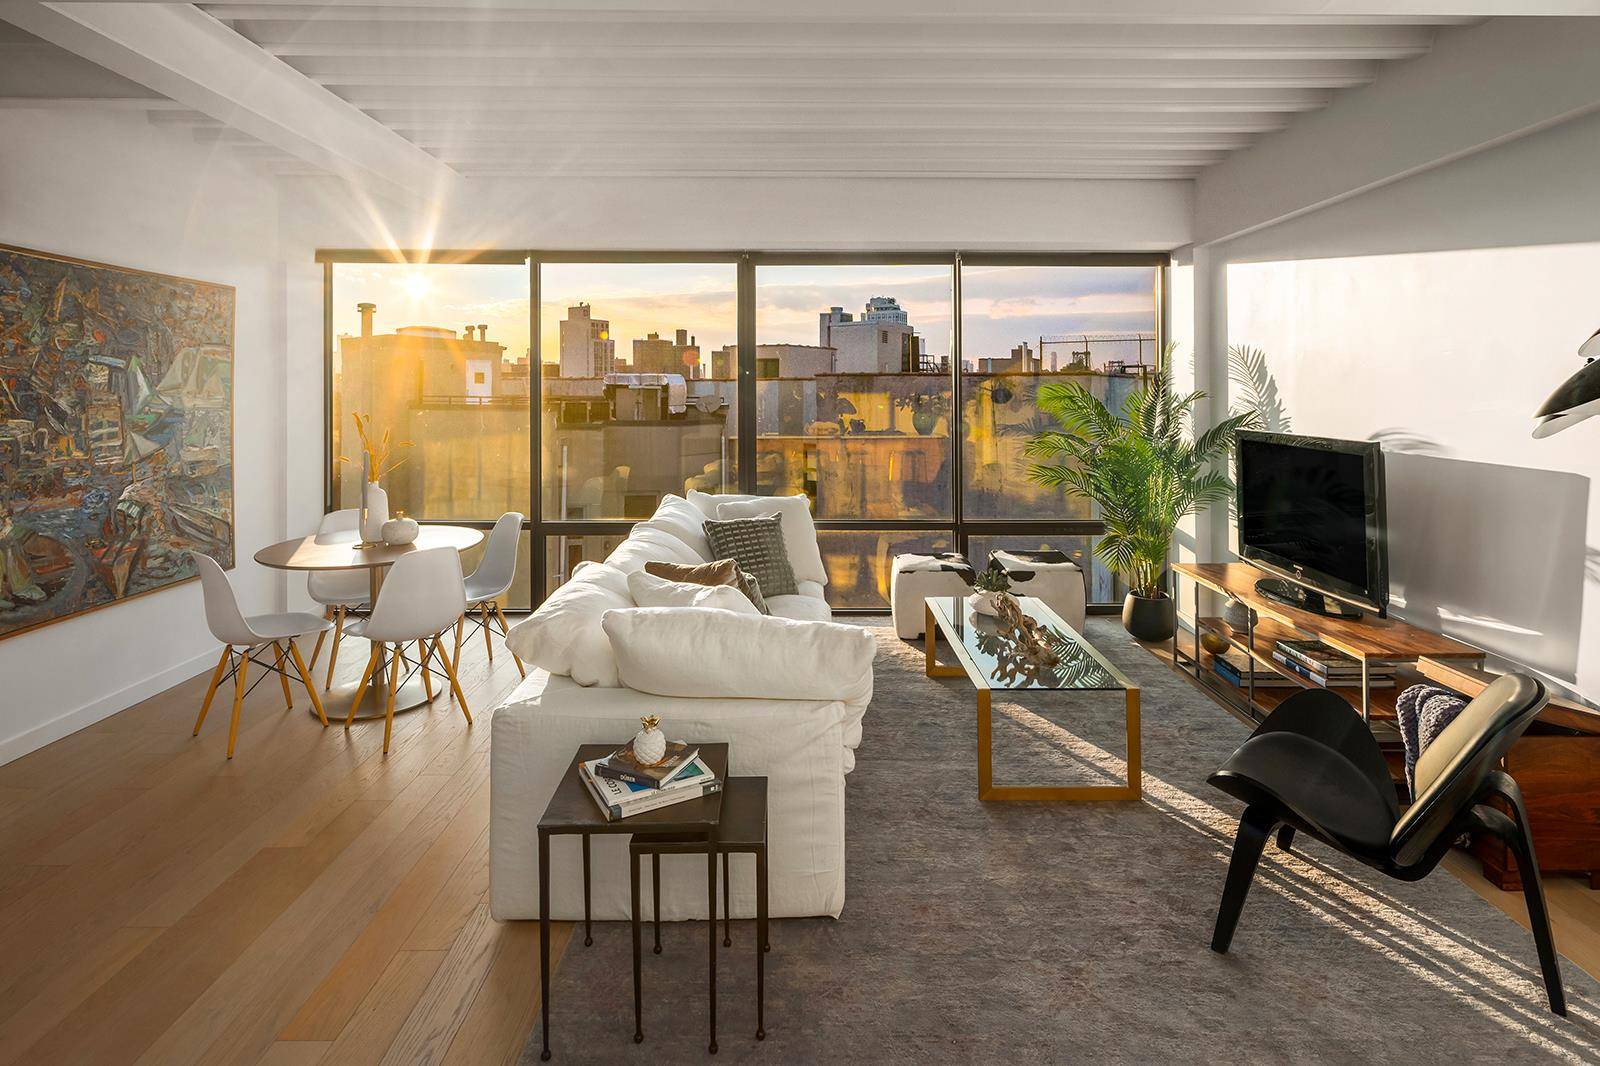 Prime Williamsburg penthouse with a huge private roof deck, private terrace, and sweeping views in a 19 residence building with amenities.